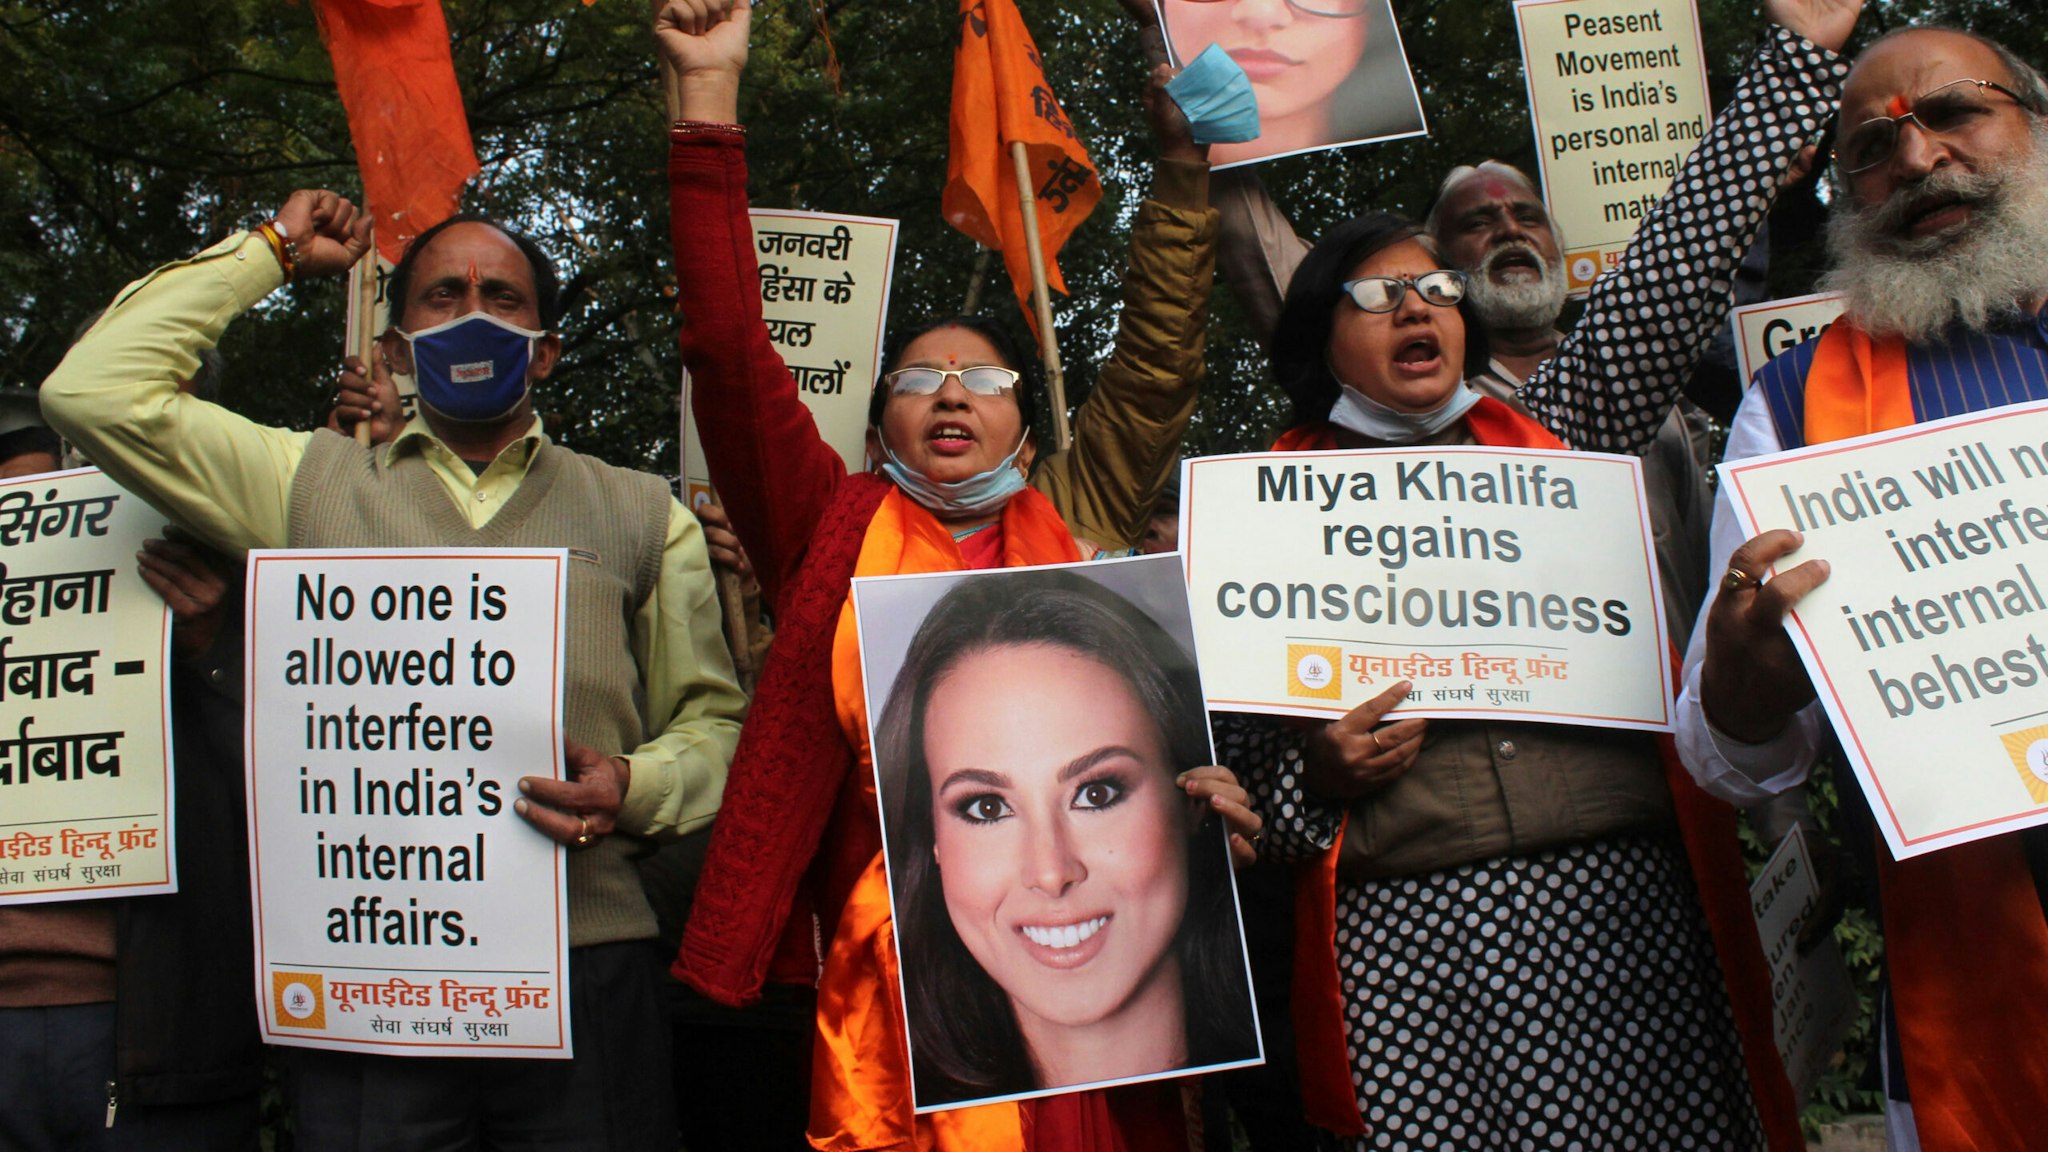 Members from United Hindu Front hold placards and shout slogans during a demonstration, to protest against Swedish climate activist Greta Thunberg, Barbadian singer Rihanna and American lawyer Meena Harris for commenting in support of protesting farmers, at Jantar Mantar in New Delhi, India on February 4, 2021.